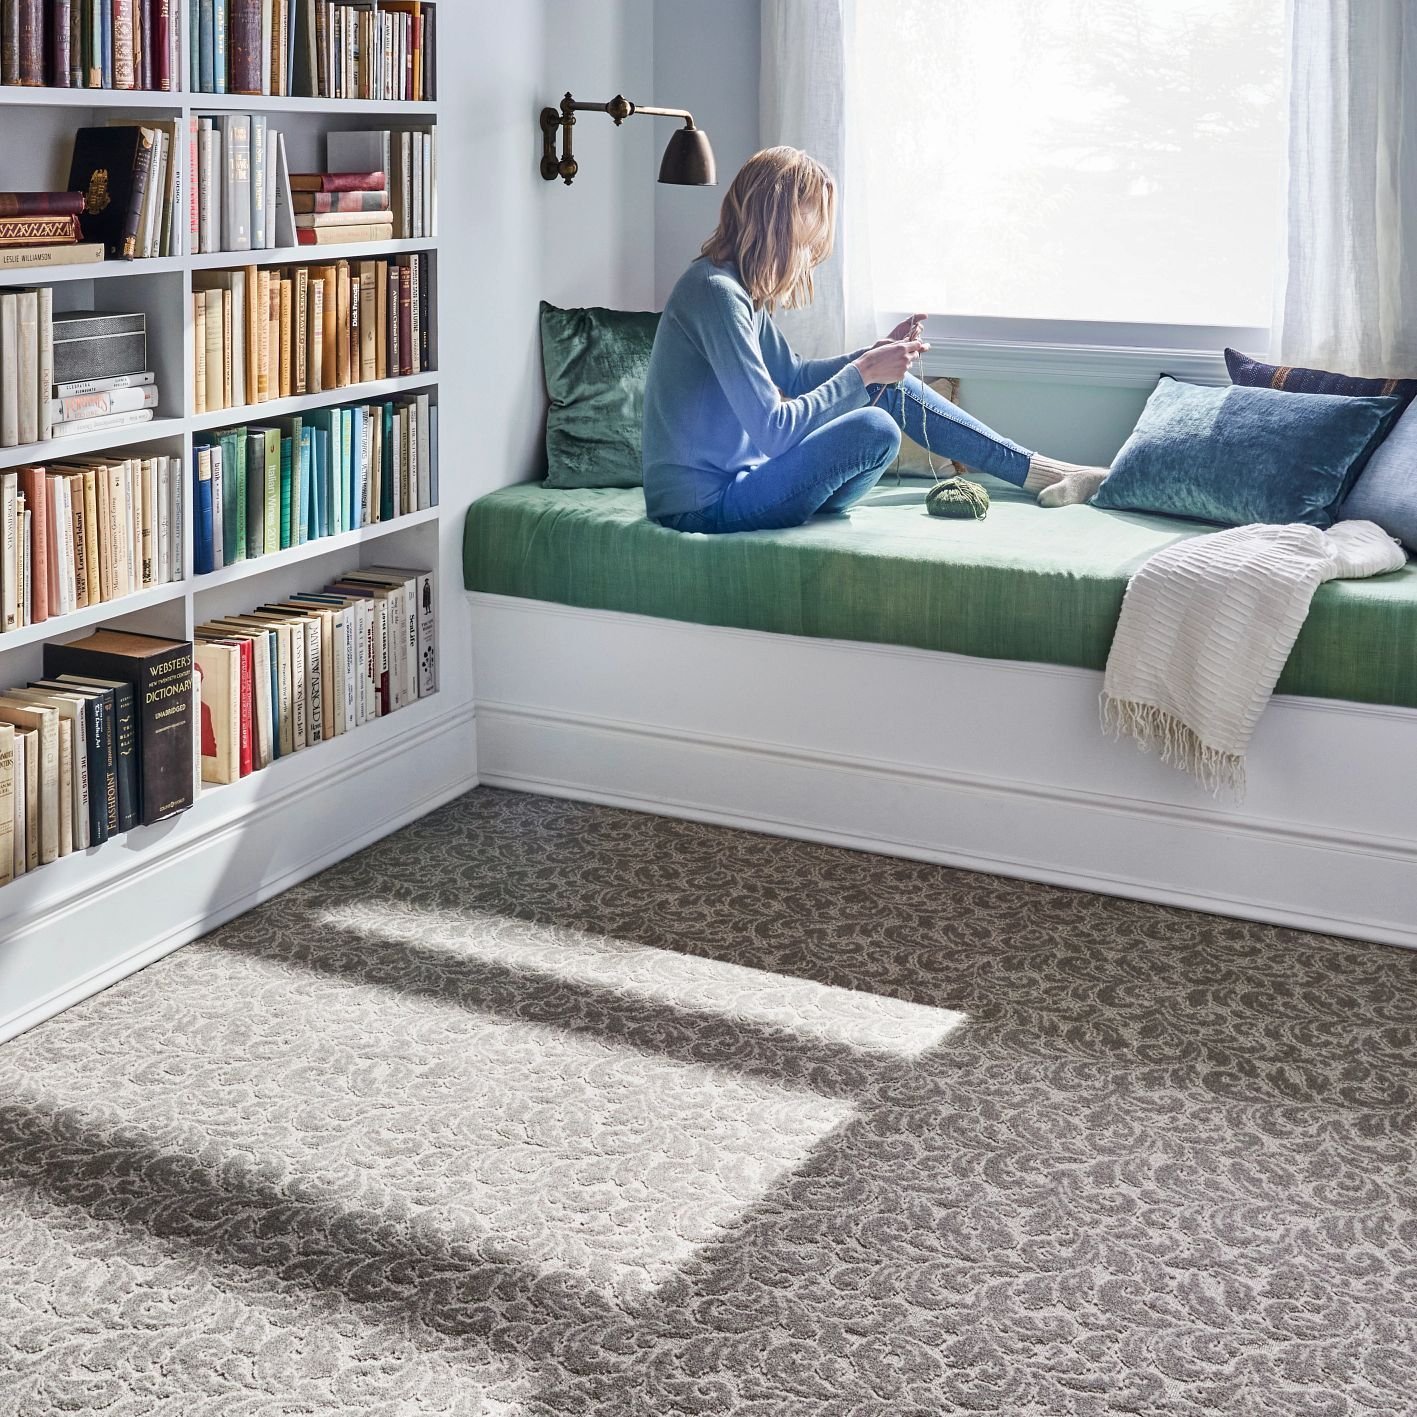 Getting started article provided by Maximum Carpets & Flooring in Lynbrook, NY